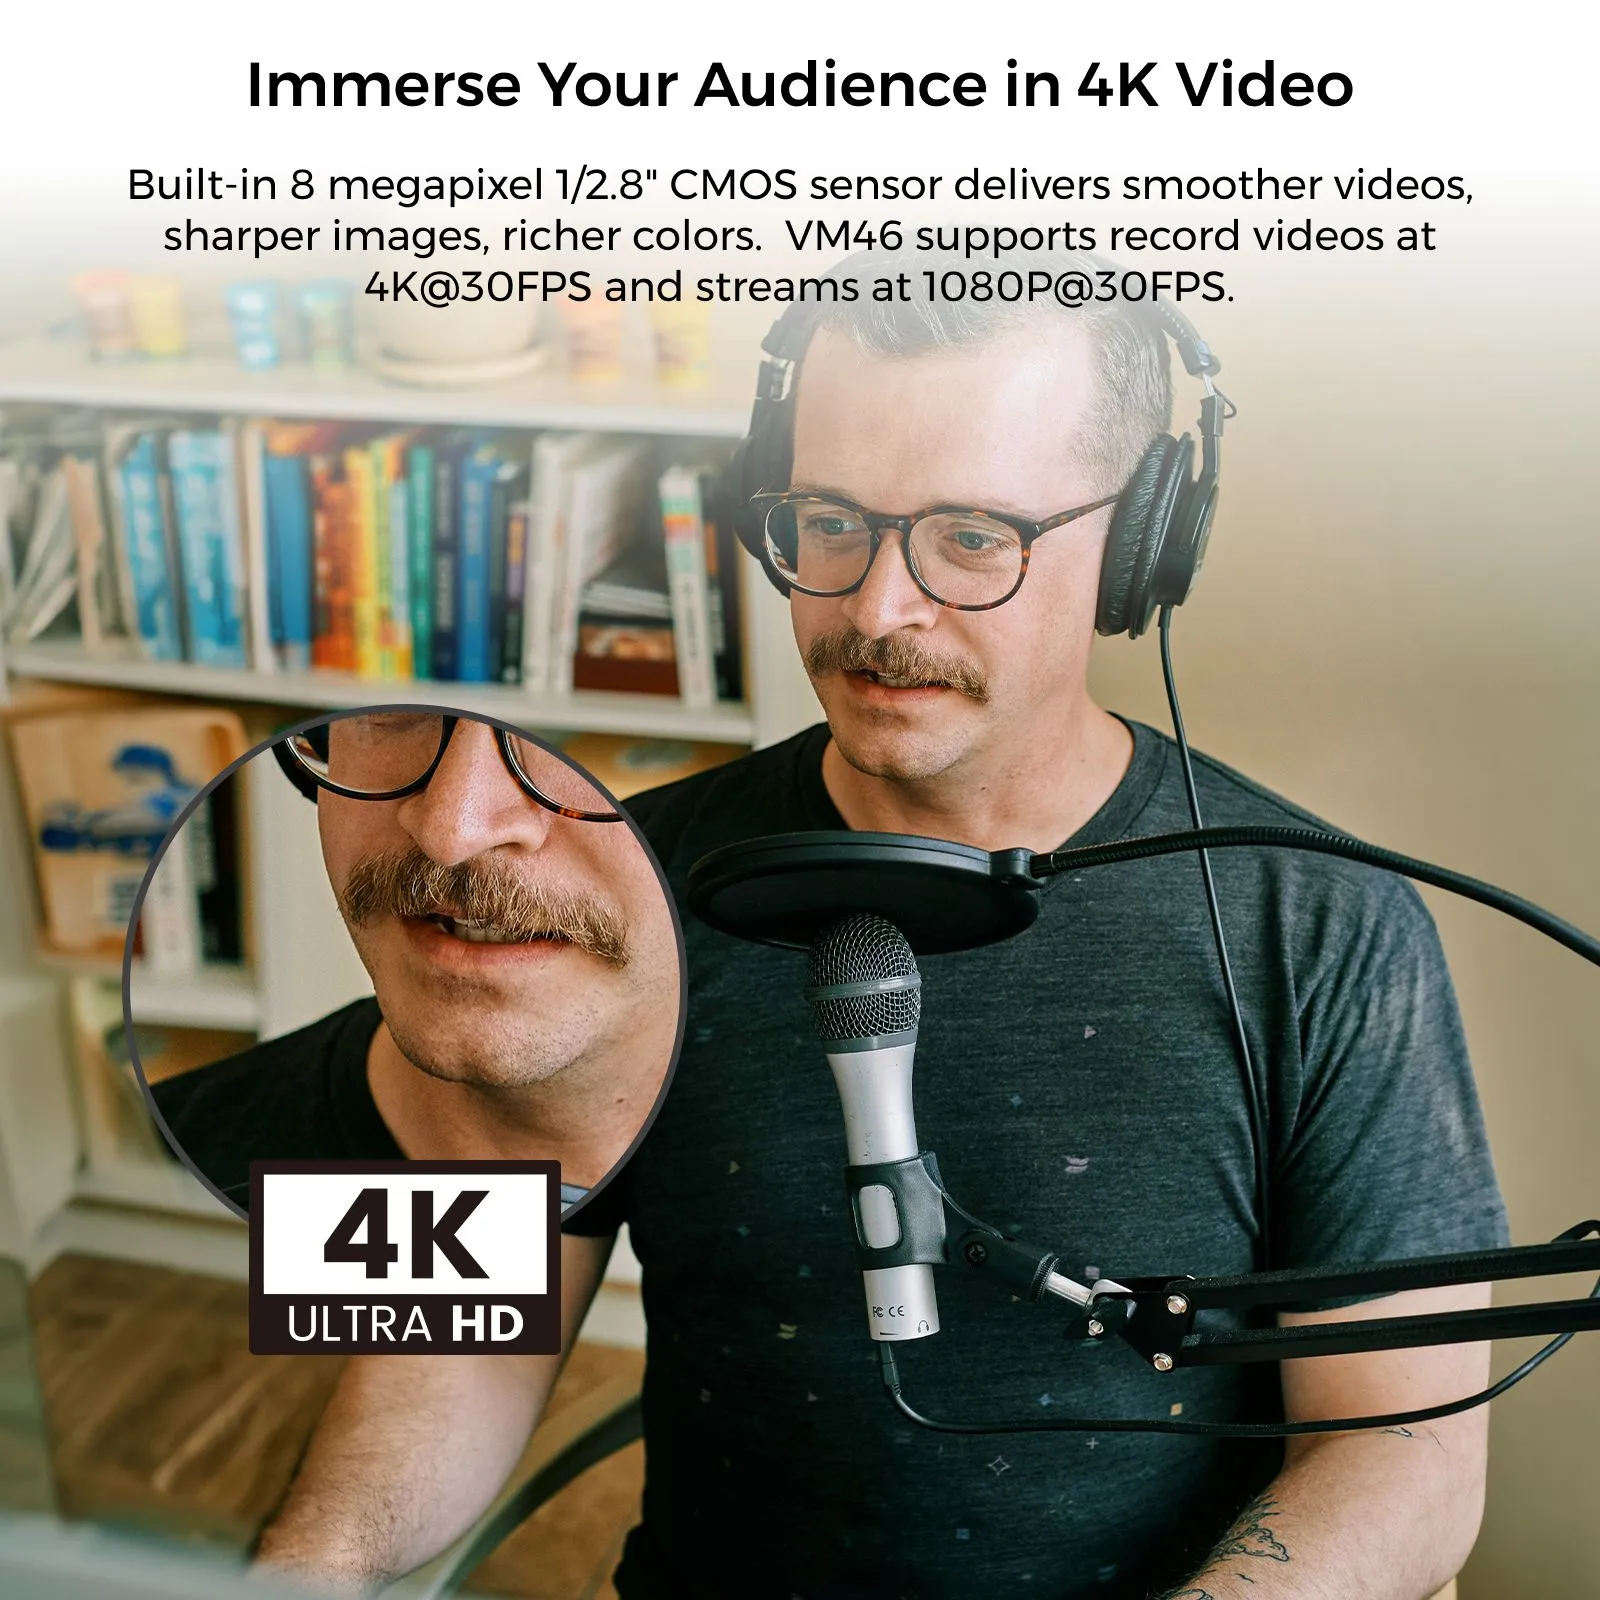 Improve your audience in 4K video 